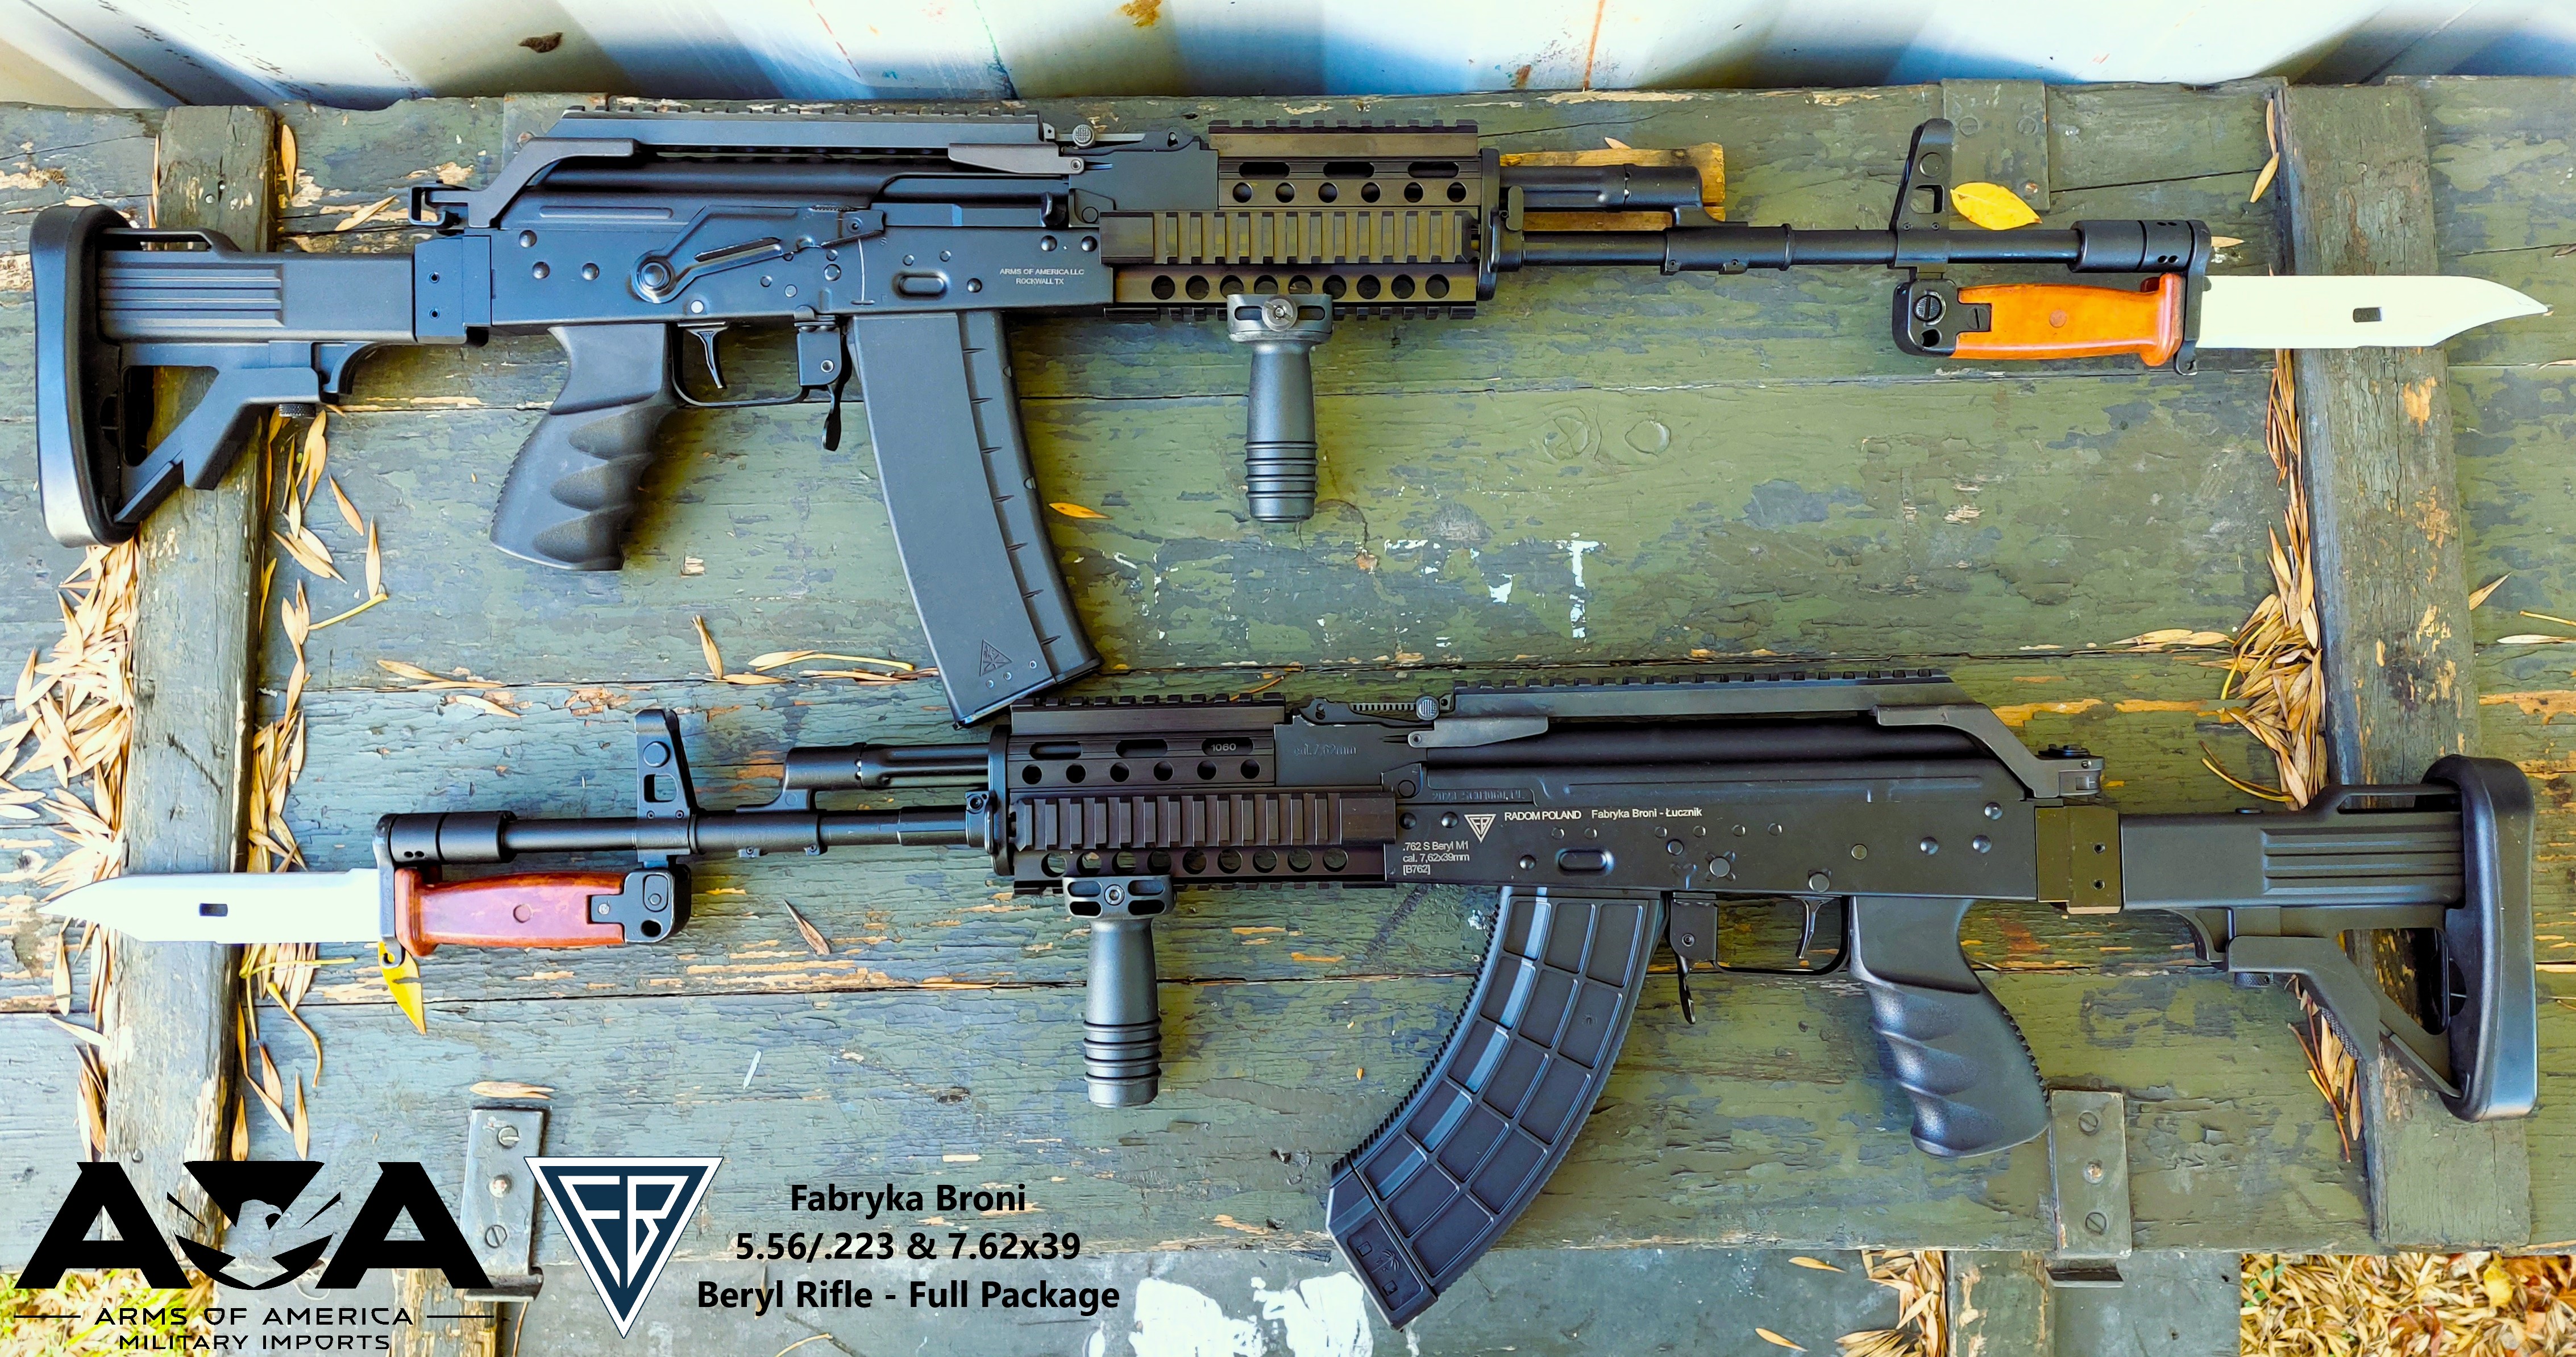 20 AK-47 Variants You Want to Own - Guns and Ammo